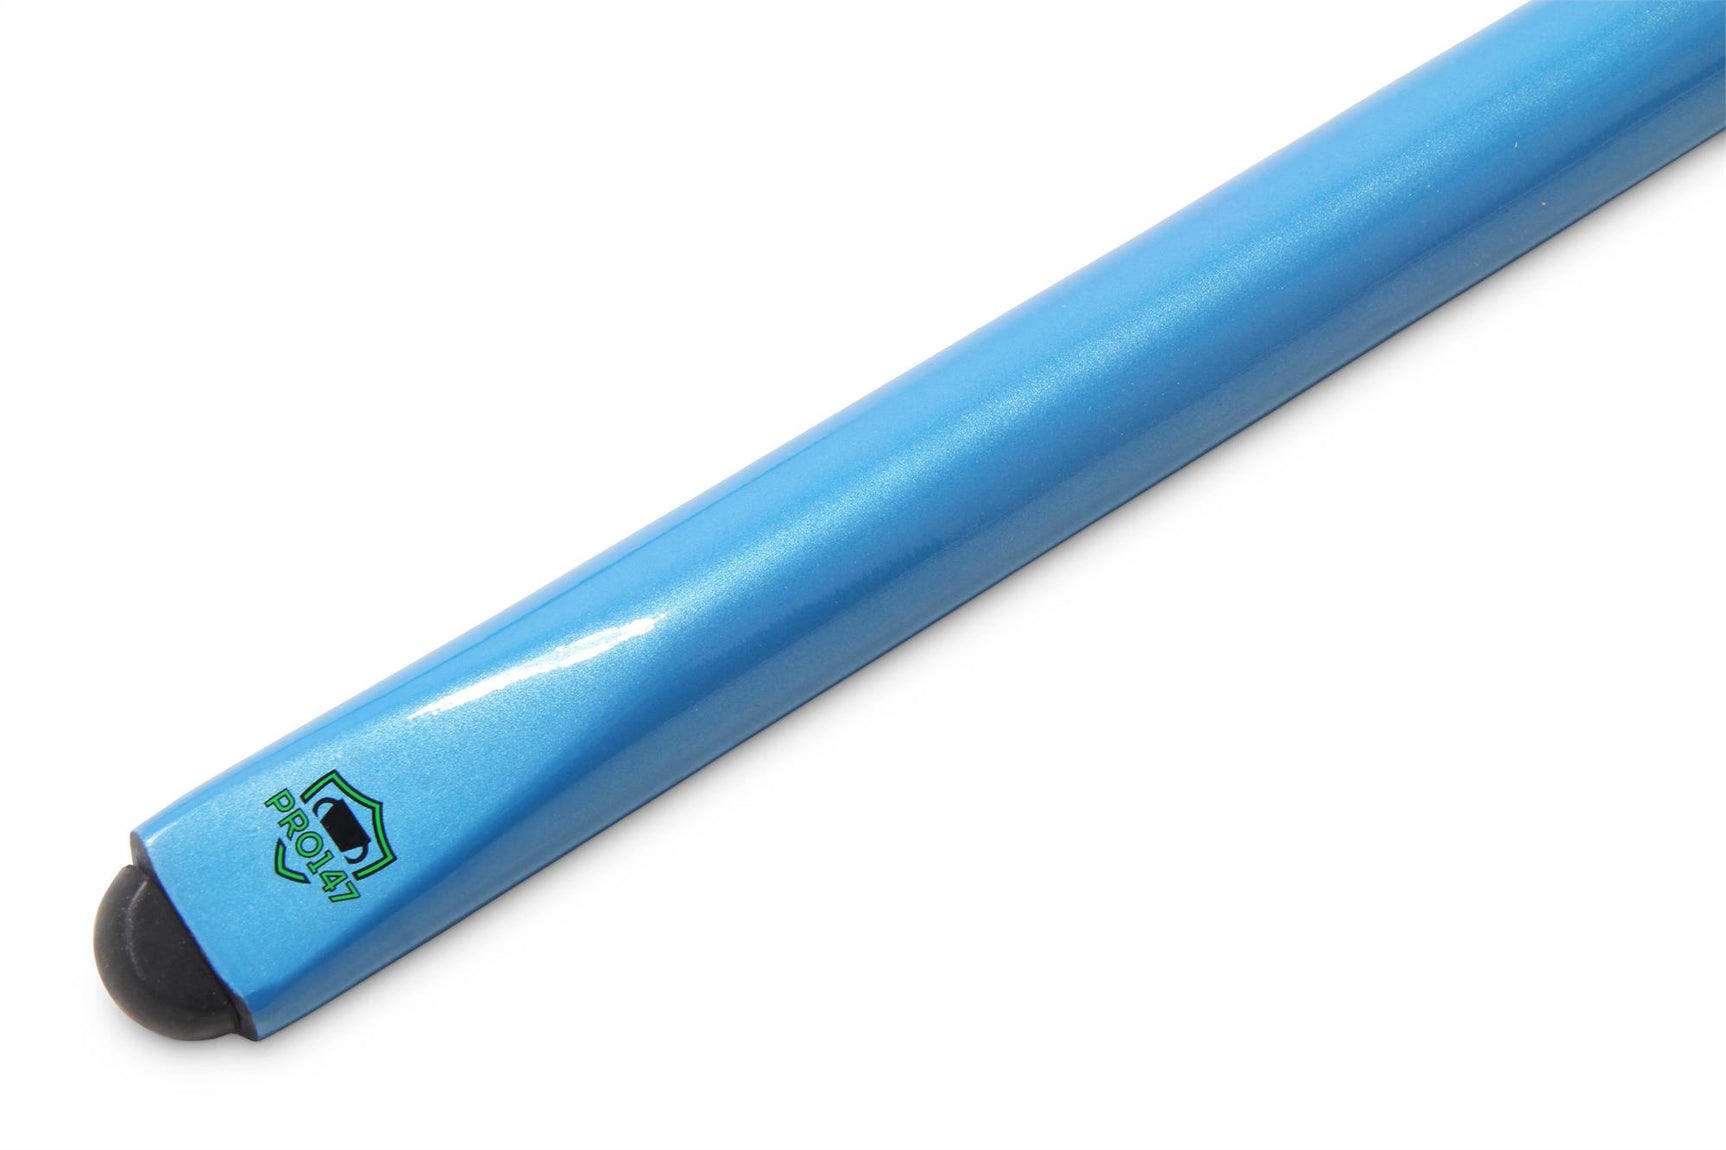 PRO147 SKY BLUE Butt 2 Piece Centre Joint Snooker Pool Cue with 9.5mm Tip